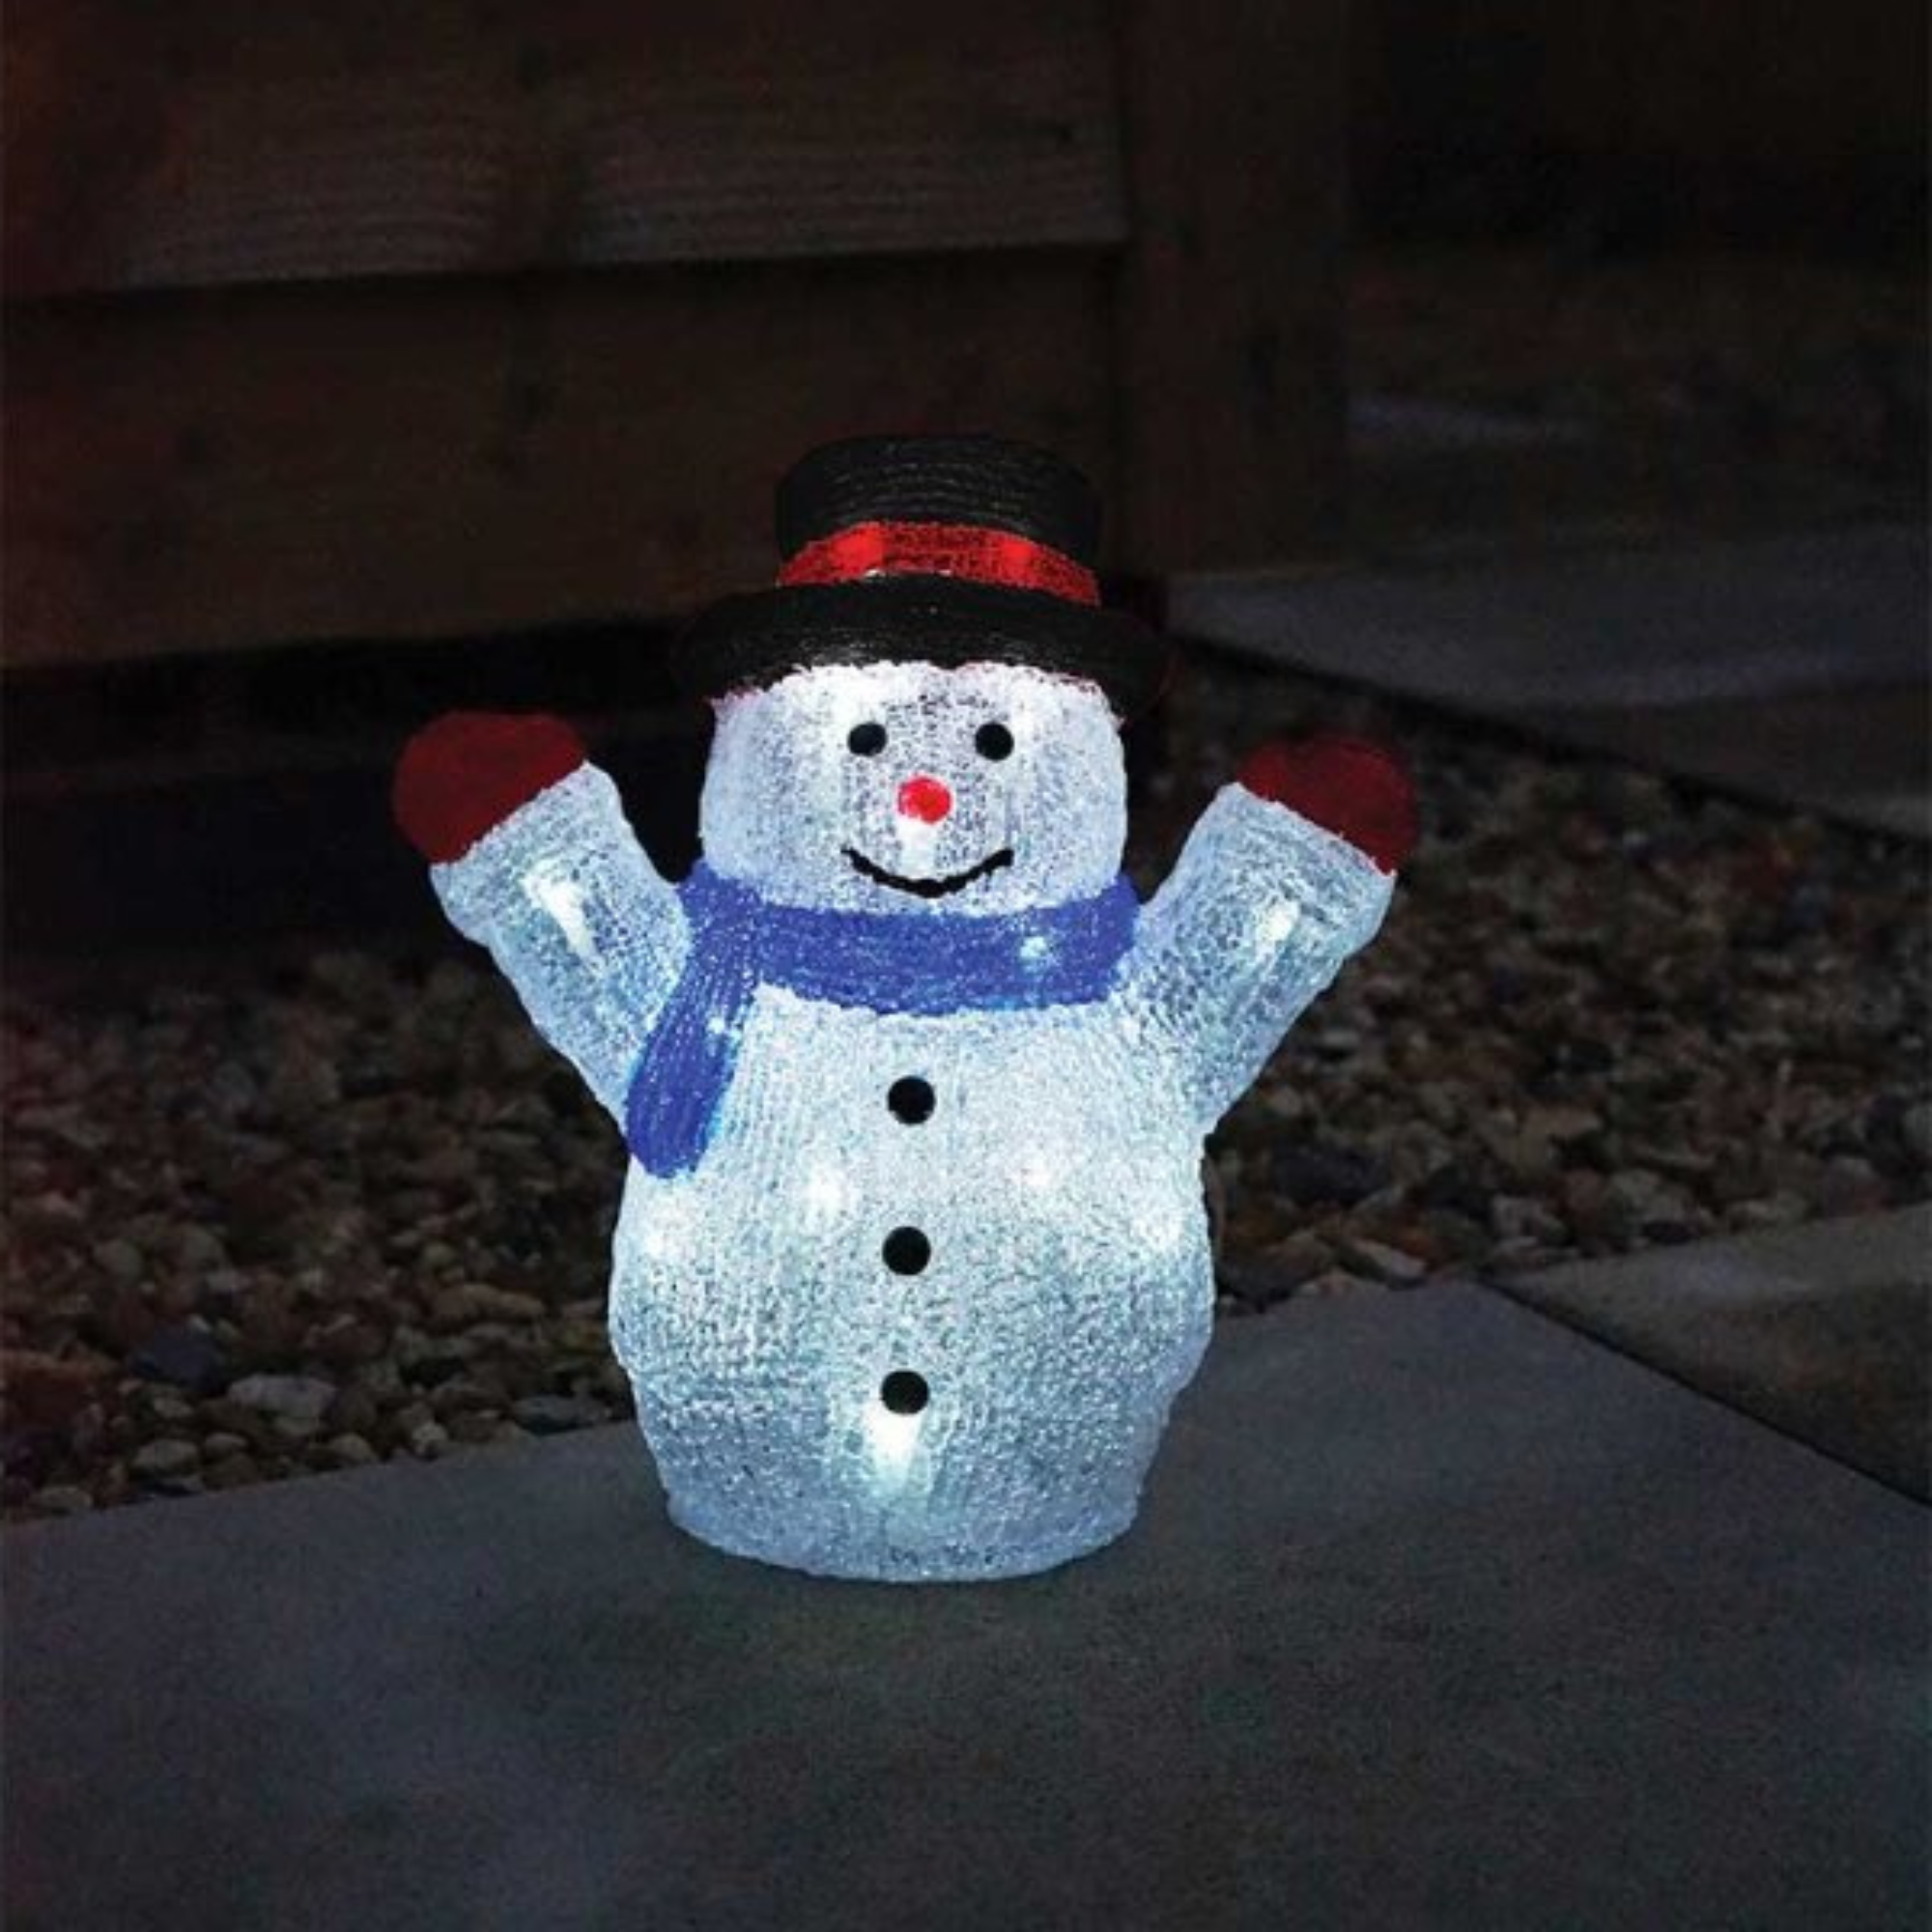 27cm Battery Operated LED Light up Acrylic Christmas Snowman Decoration